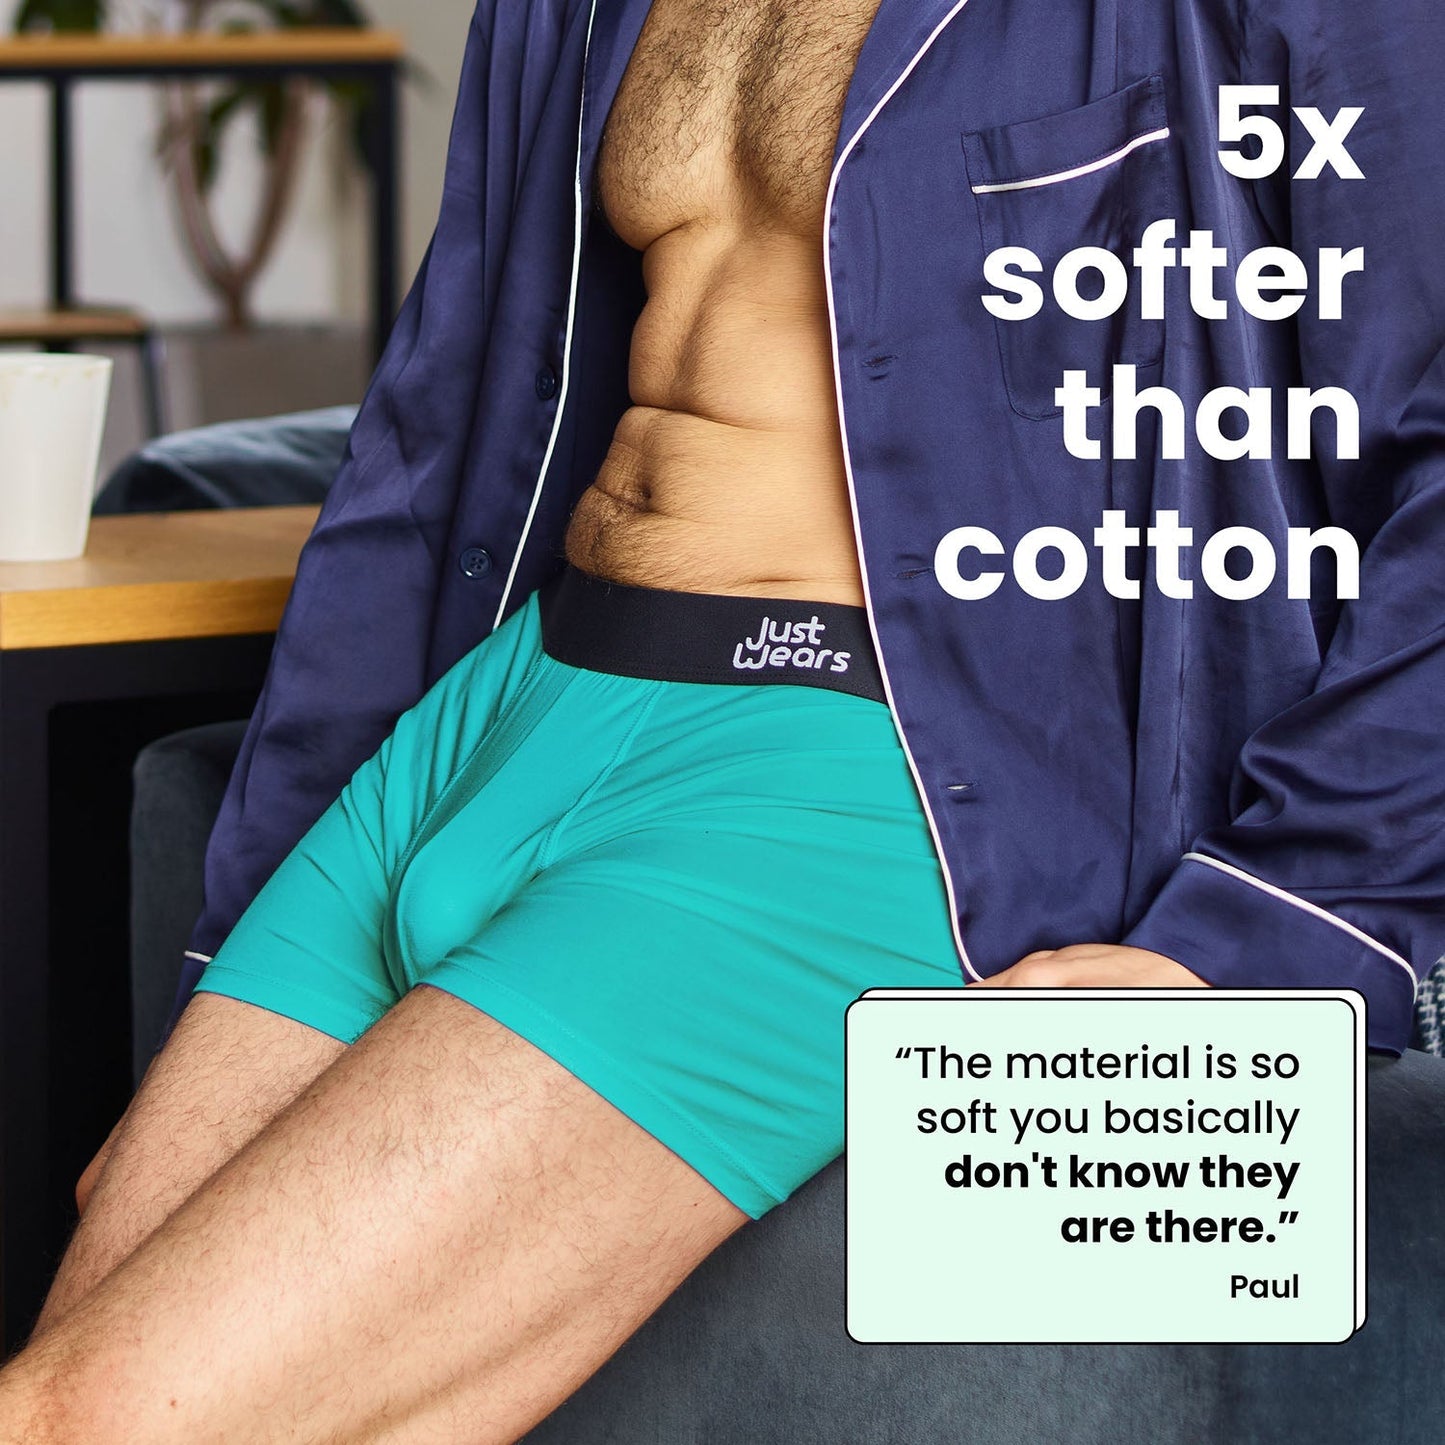 Boxer Briefs Duo Pack Europe (color - Blue & Green)